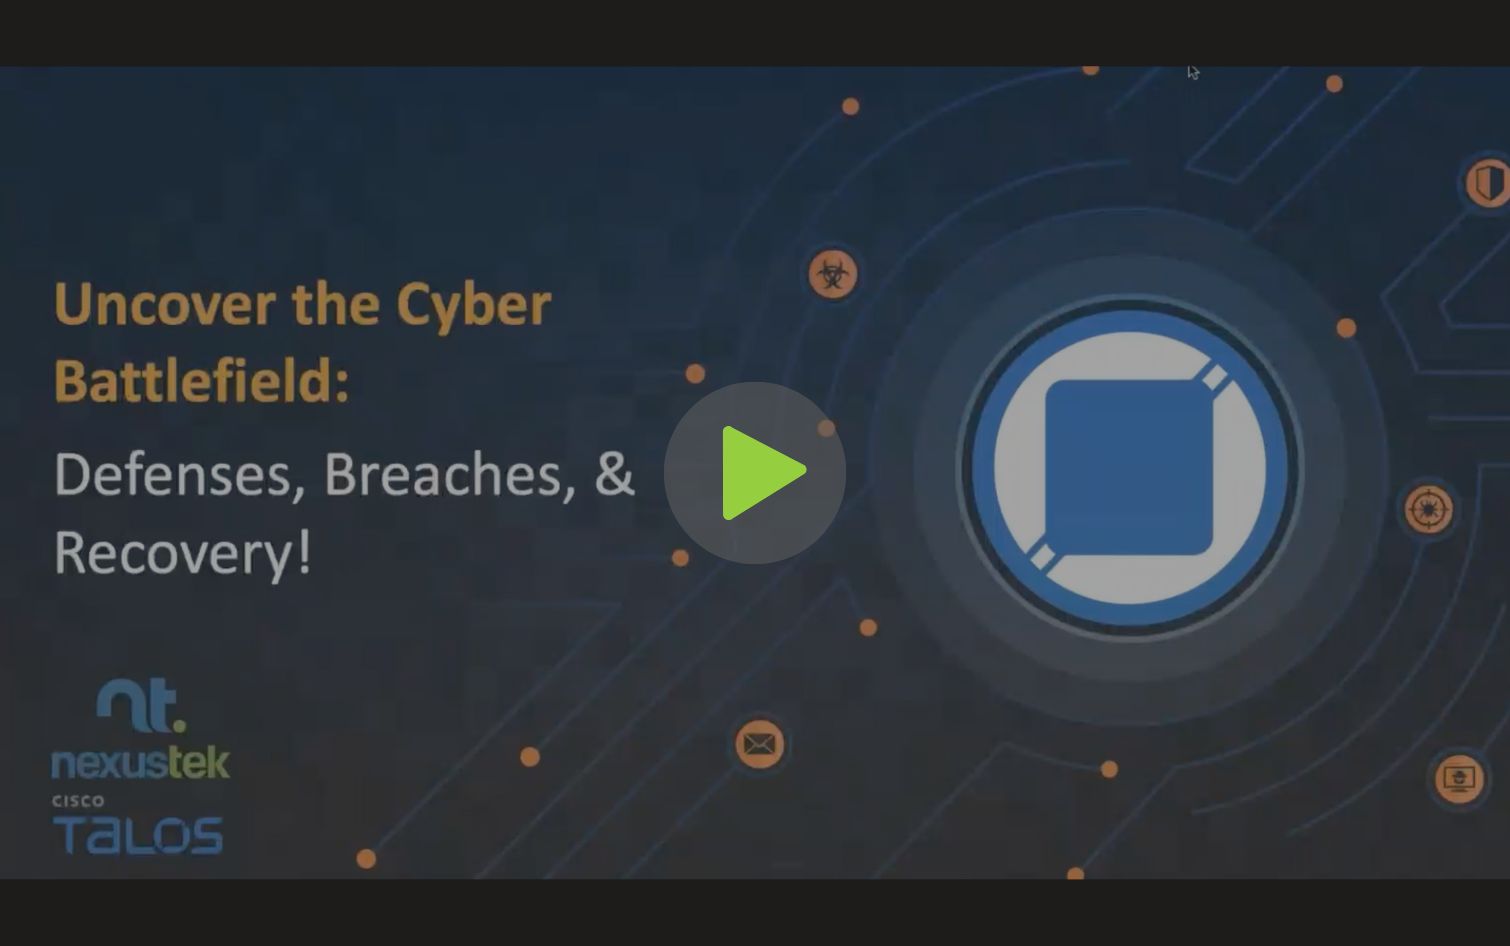 Uncover the Cyber Battlefield_ Defenses, Breaches, & Recovery!